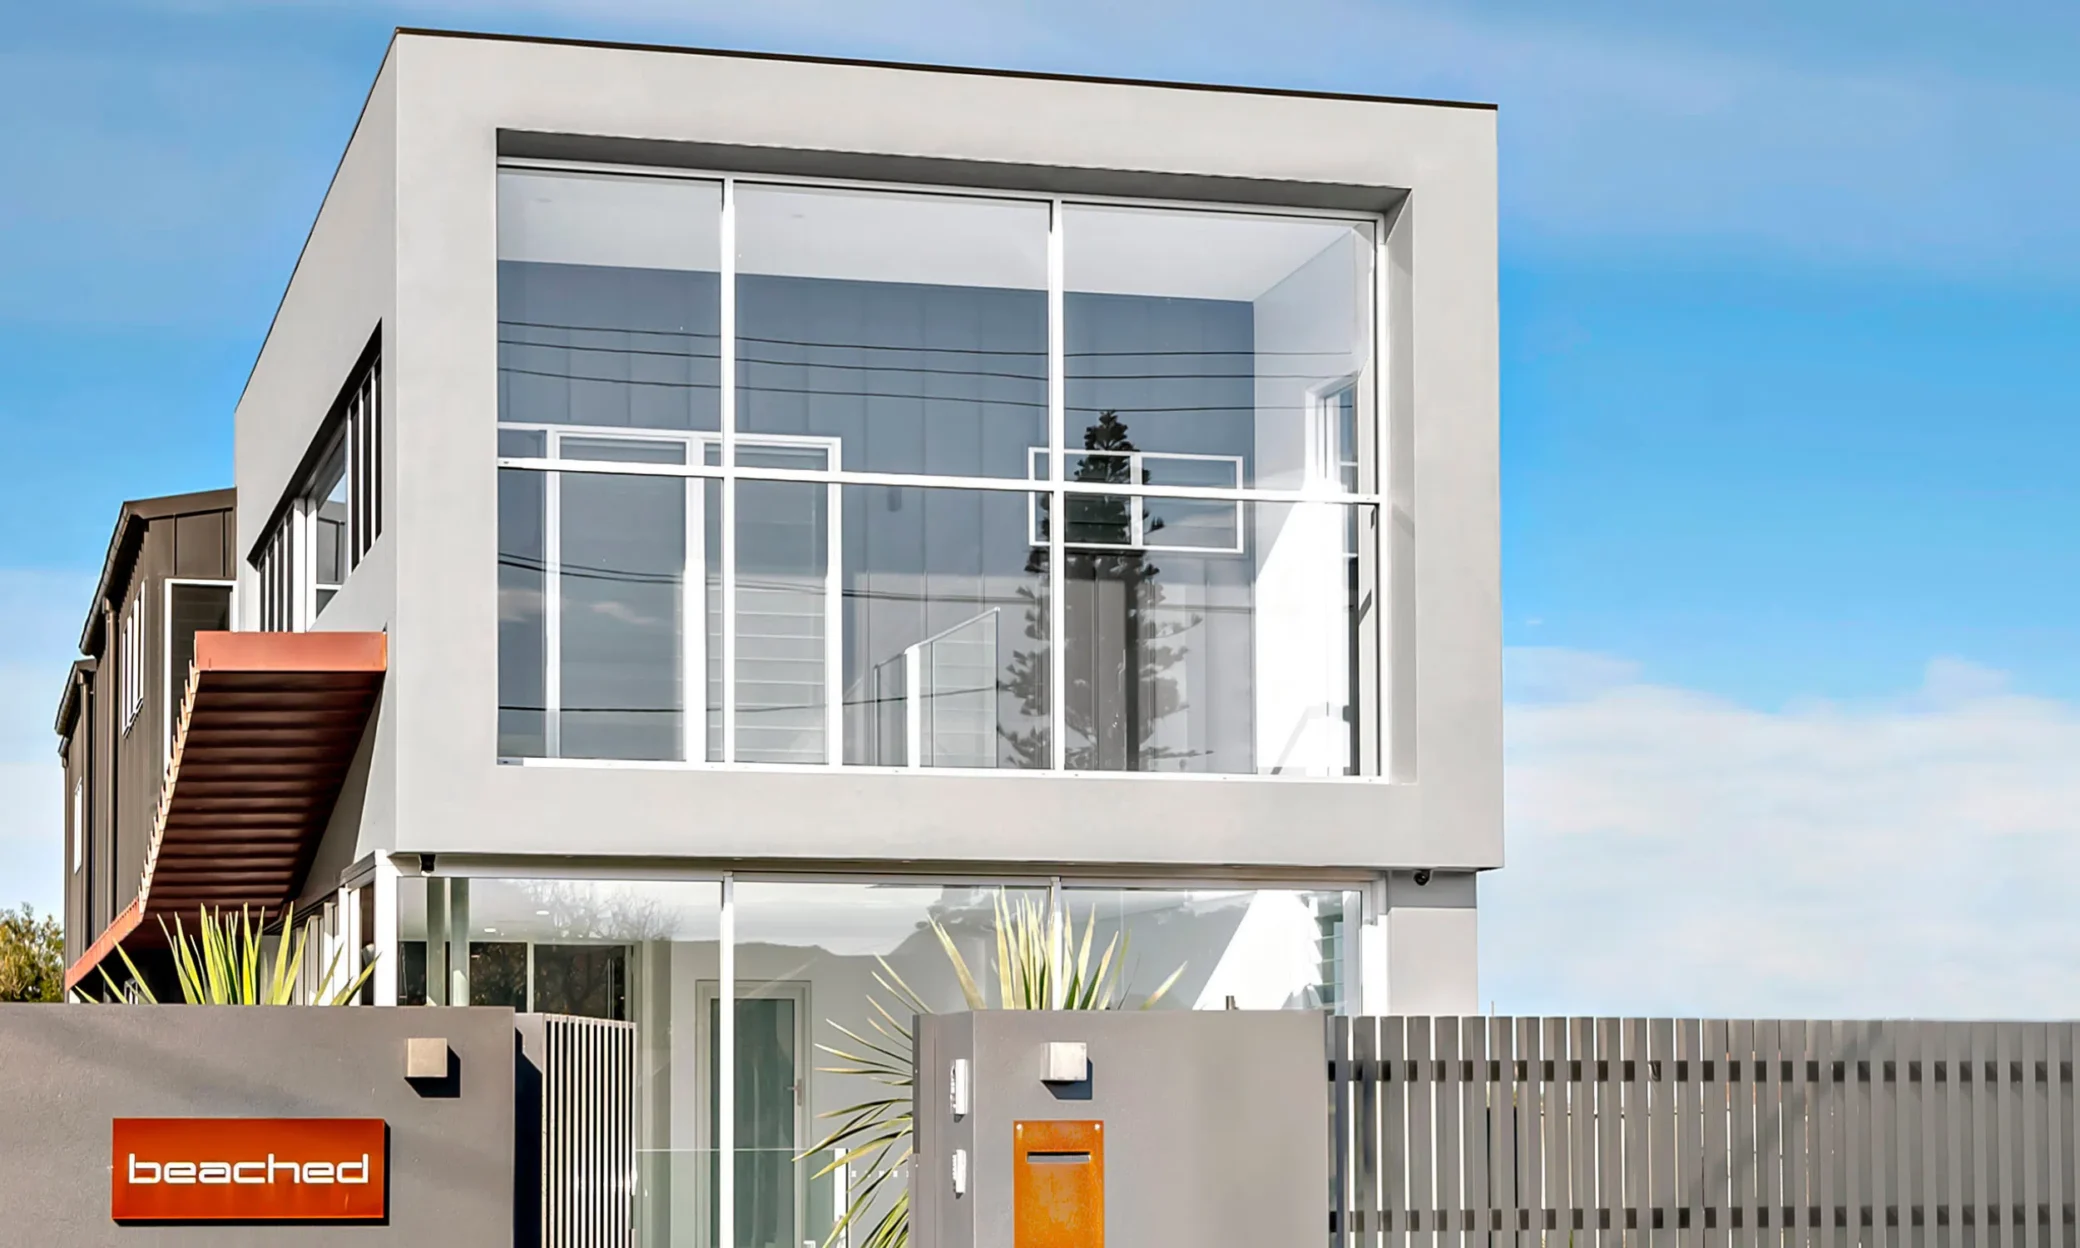 Modern two-story house in Newcastle with a prominent cubic upper floor featuring large windows. The aesthetic includes a minimalist white exterior and a small balcony with a terracotta planter. The logo "beached